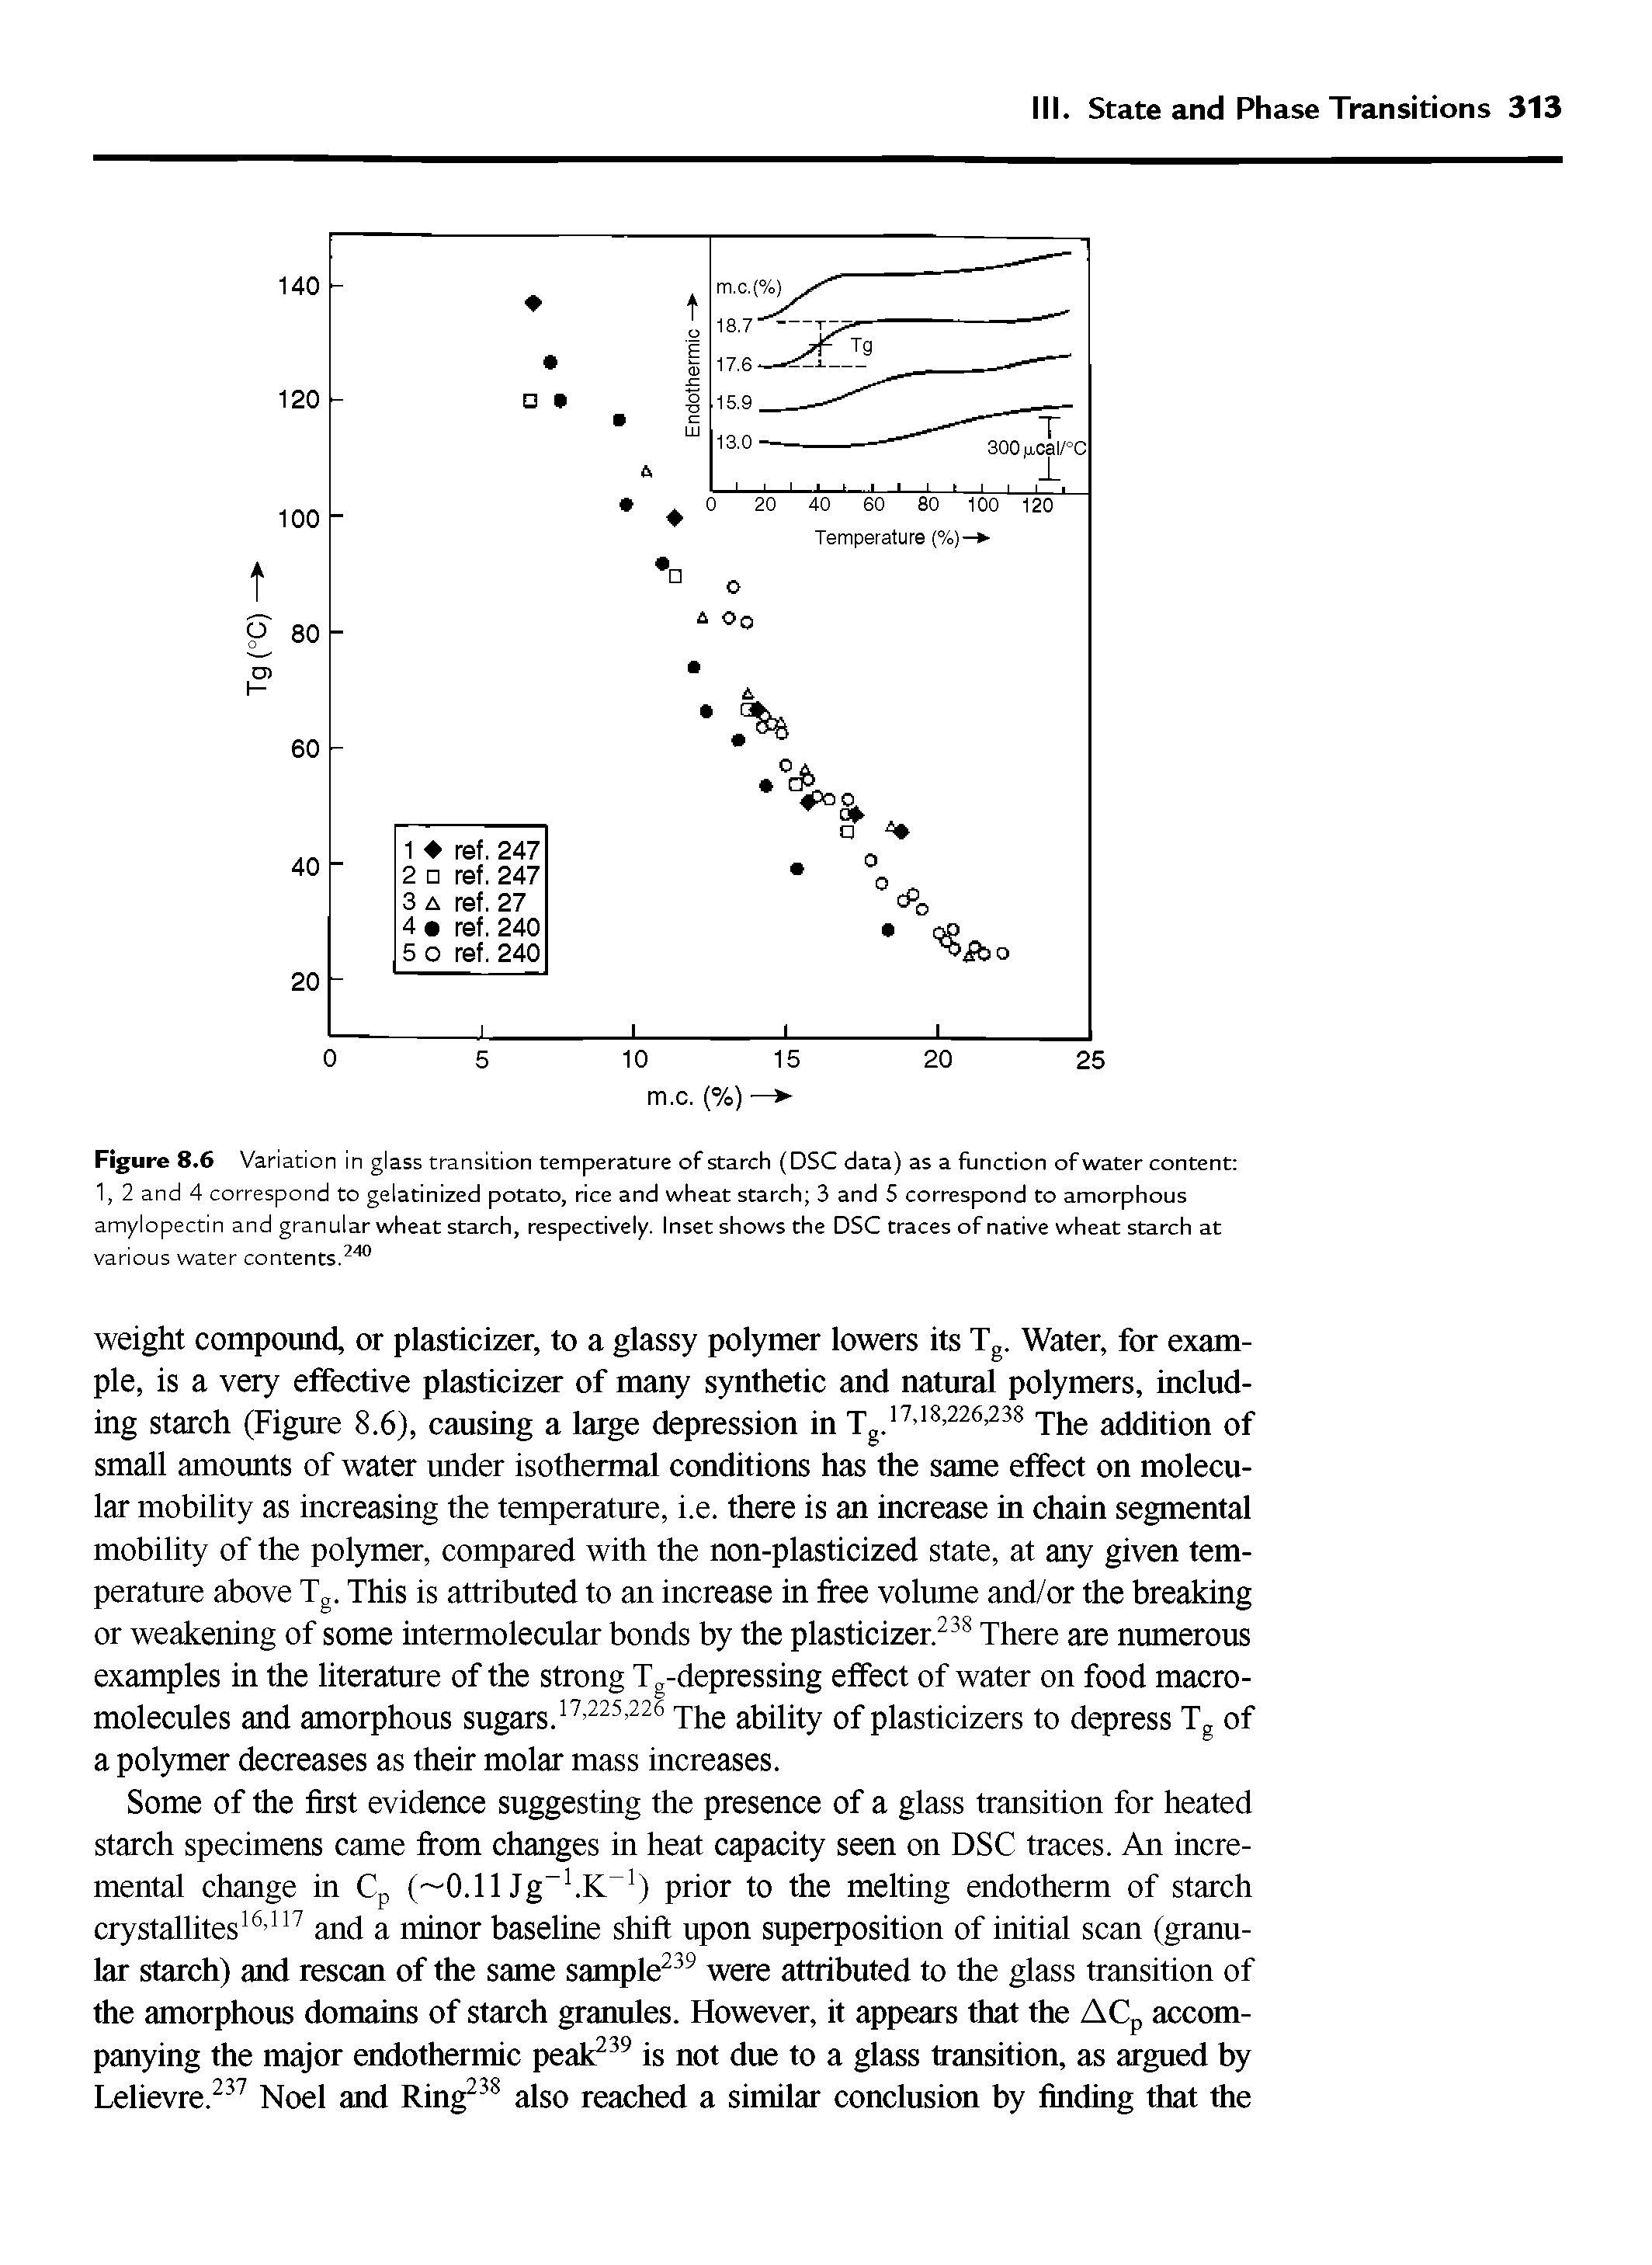 Figure 8.6 Variation in glass transition temperature of starch (DSC data) as a function of water content 1, 2 and 4 correspond to gelatinized potato, rice and wheat starch 3 and 5 correspond to amorphous amylopectin and granular wheat starch, respectively. Inset shows the DSC traces of native wheat starch at...